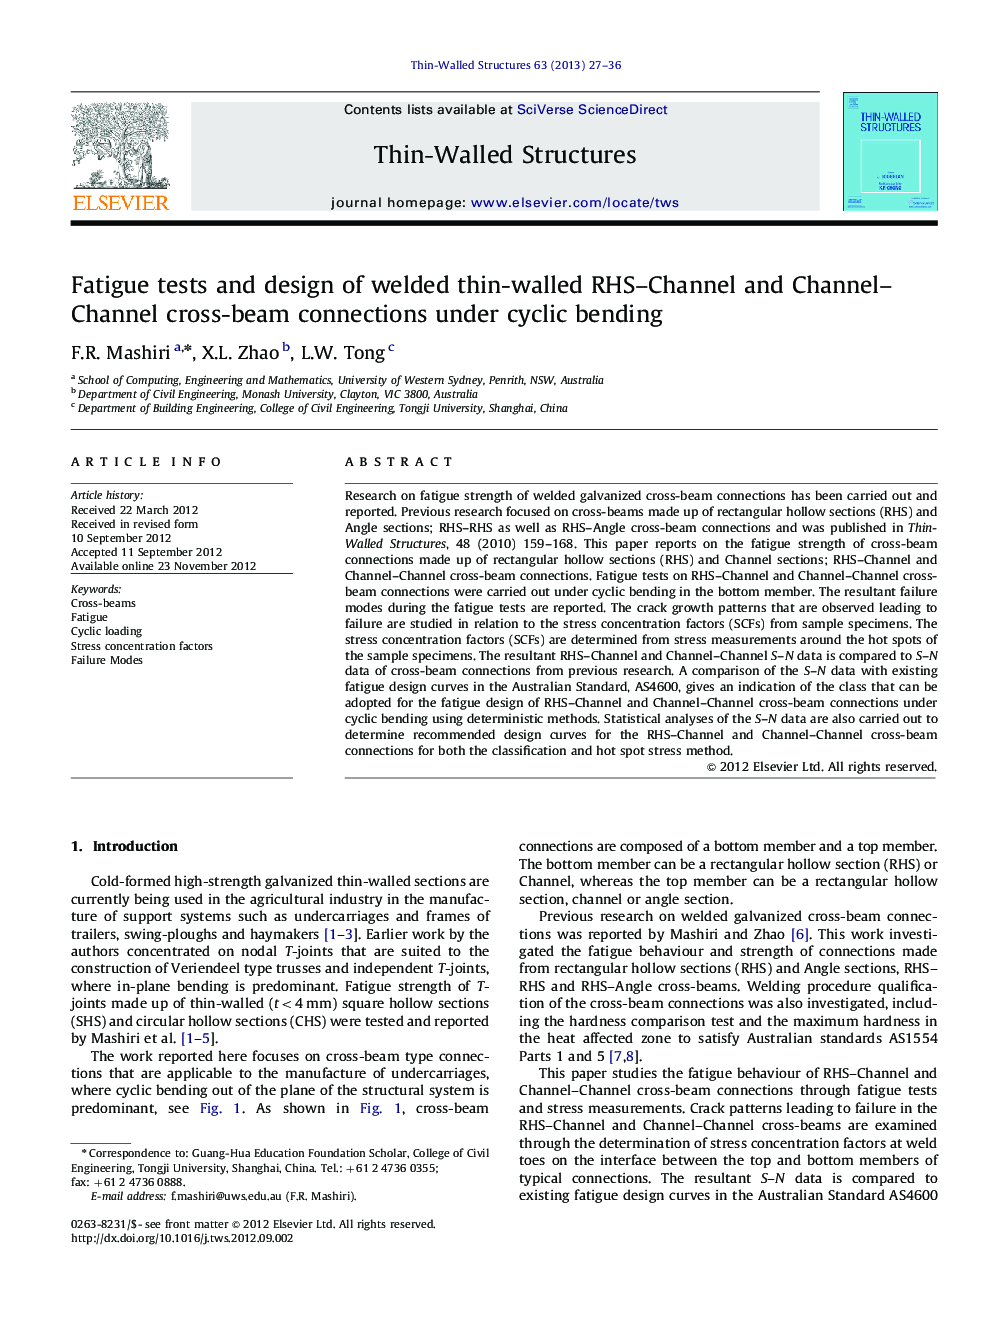 Fatigue tests and design of welded thin-walled RHS–Channel and Channel–Channel cross-beam connections under cyclic bending